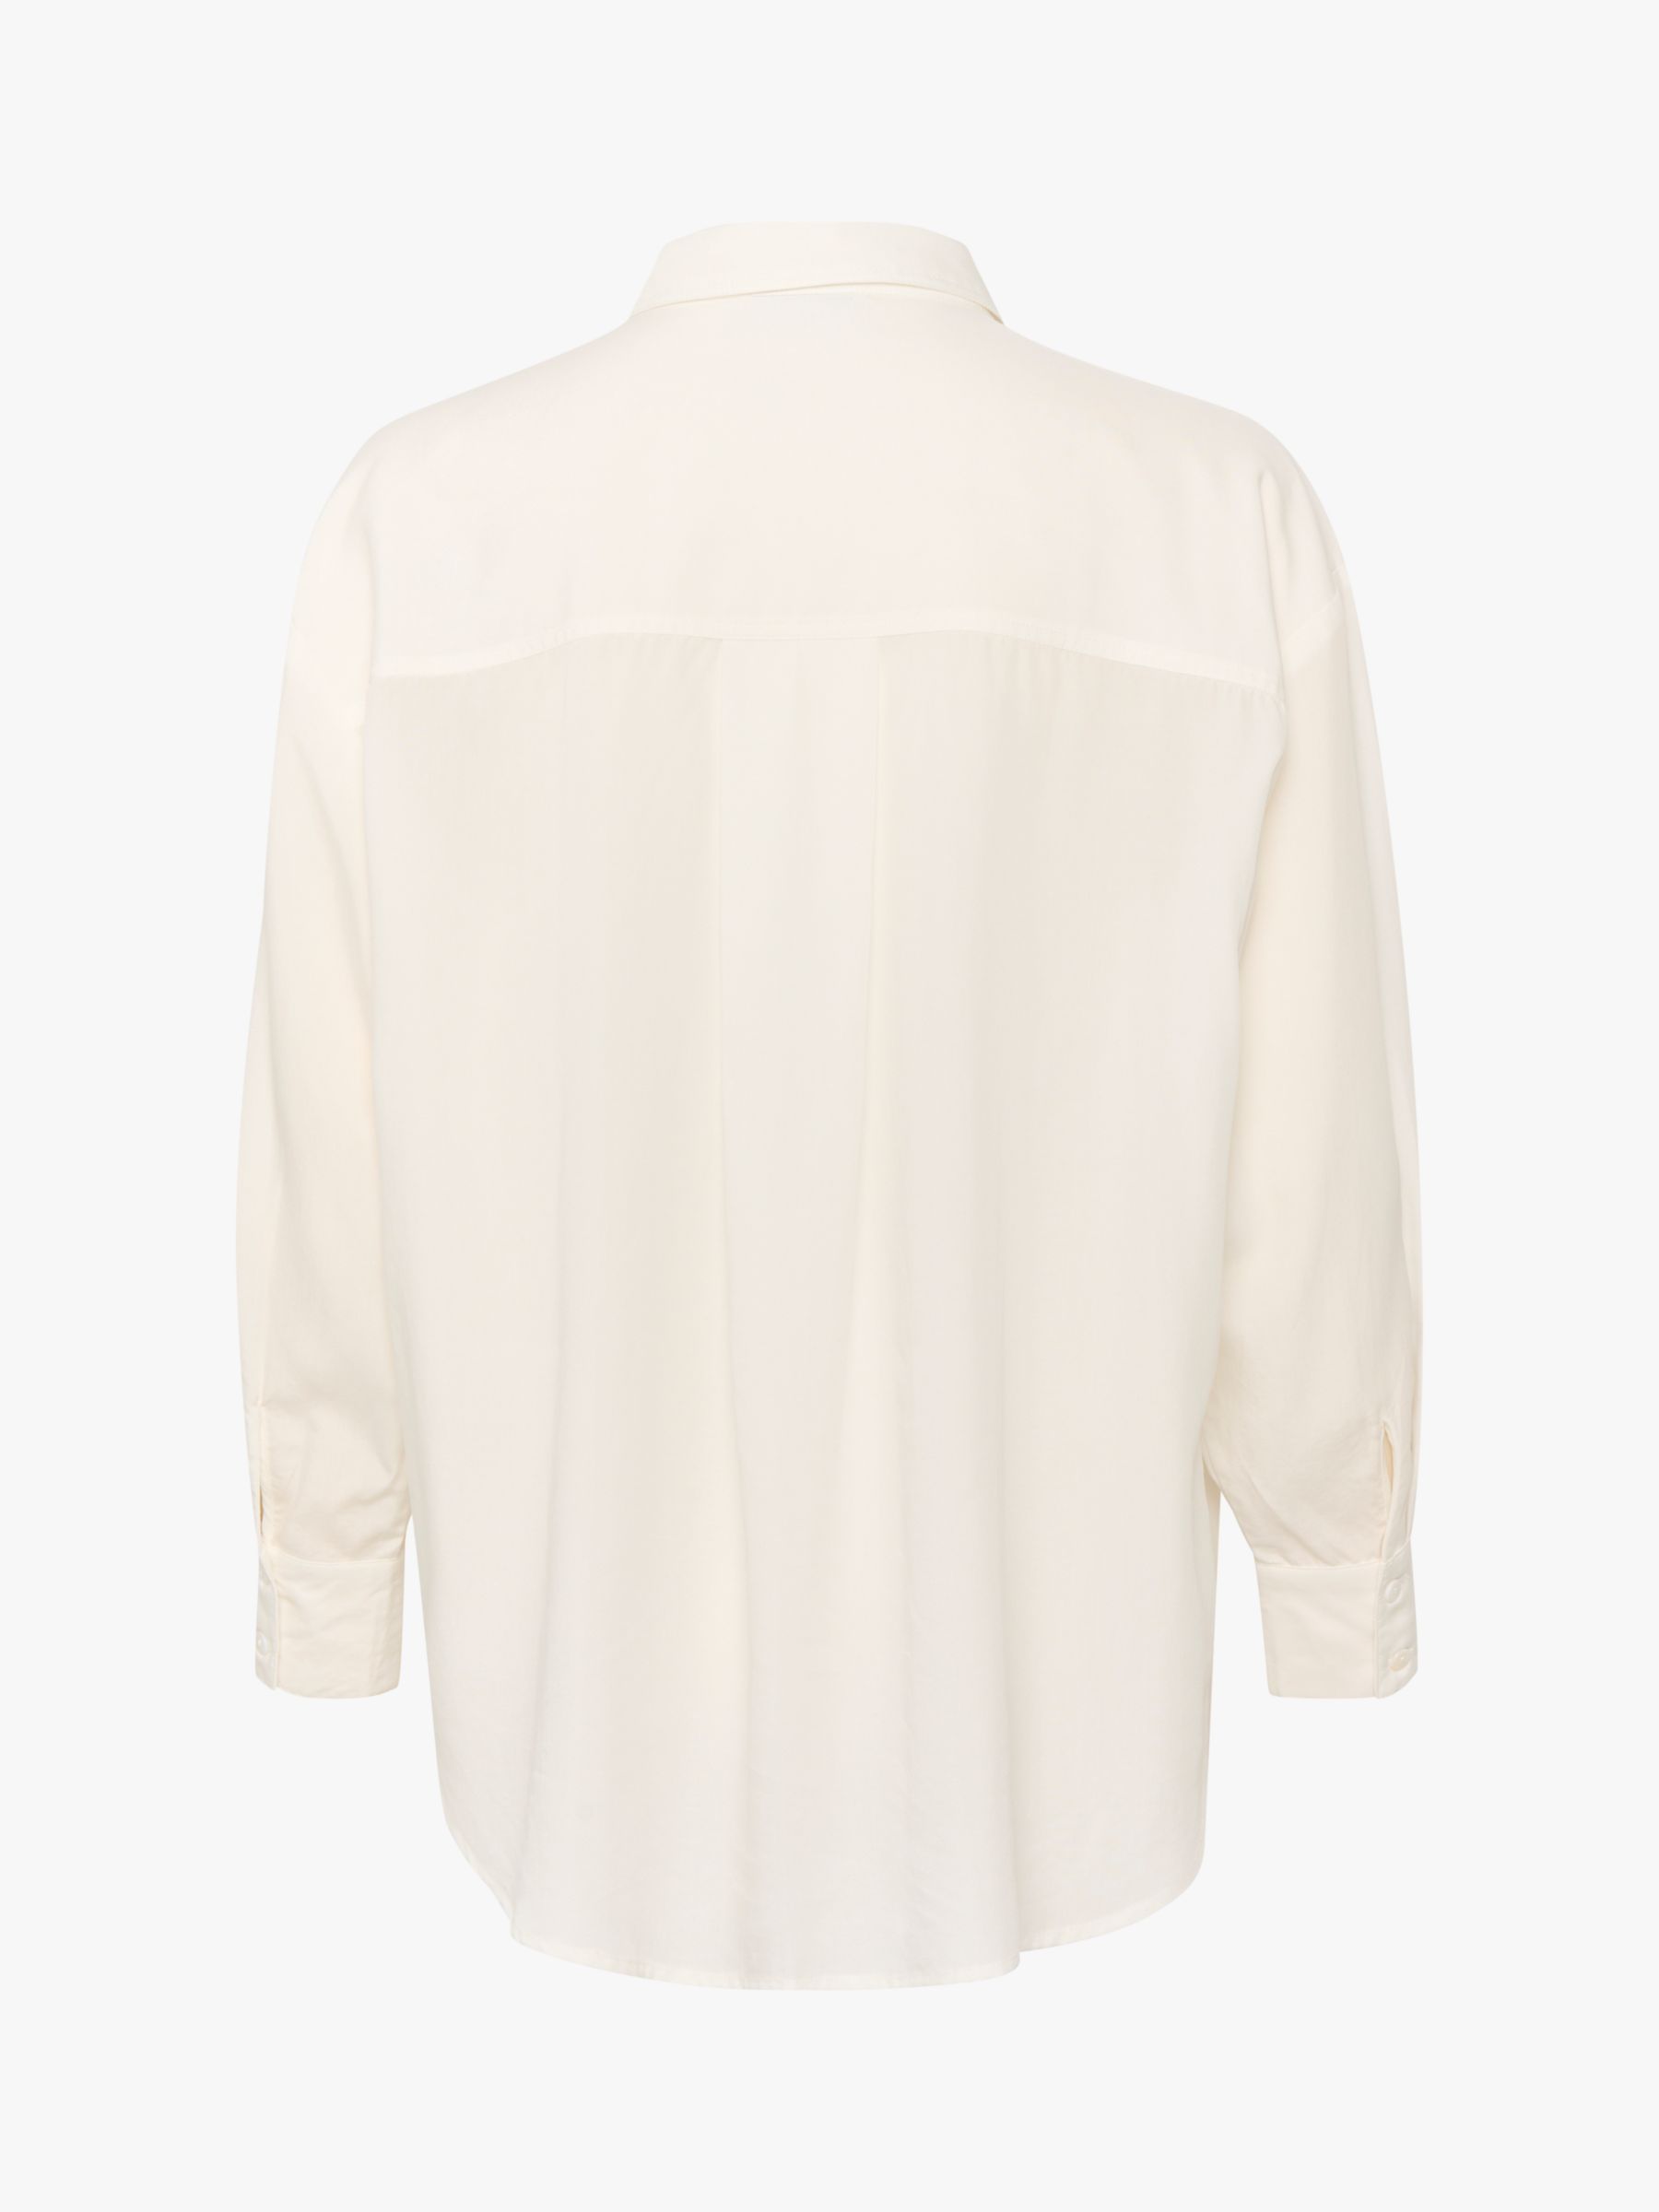 Buy MY ESSENTIAL WARDROBE Tulla Casual Fit Button Up Shirt Online at johnlewis.com